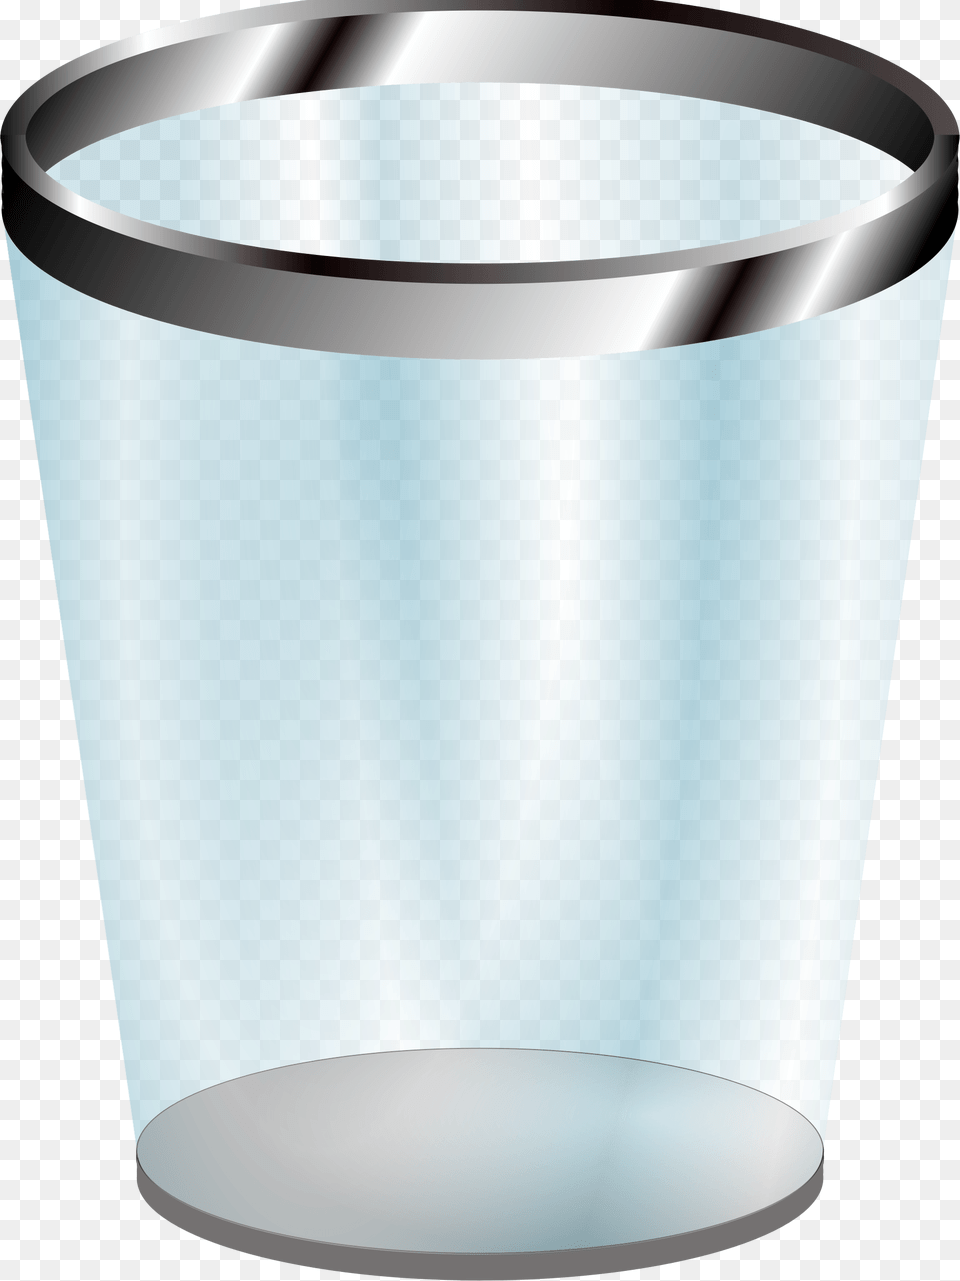 Clip Arts Related To Transparent Recycle Bin, Glass, Cup, Mailbox Free Png Download